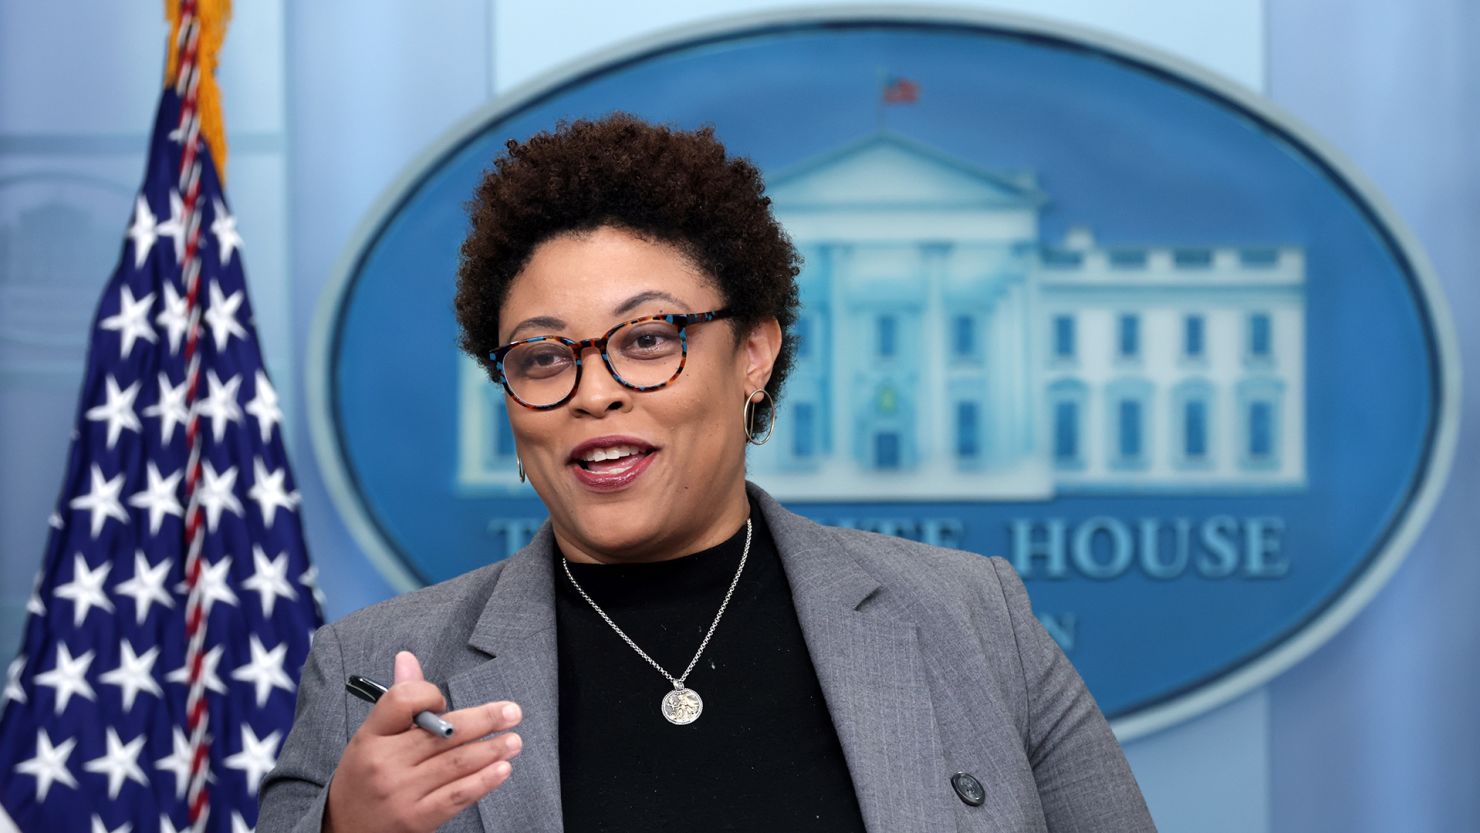 Office of Management and Budget Director Shalanda Young speaks during a daily news briefing at the James S. Brady Press Briefing Room of the White House on March 10 in Washington, DC.